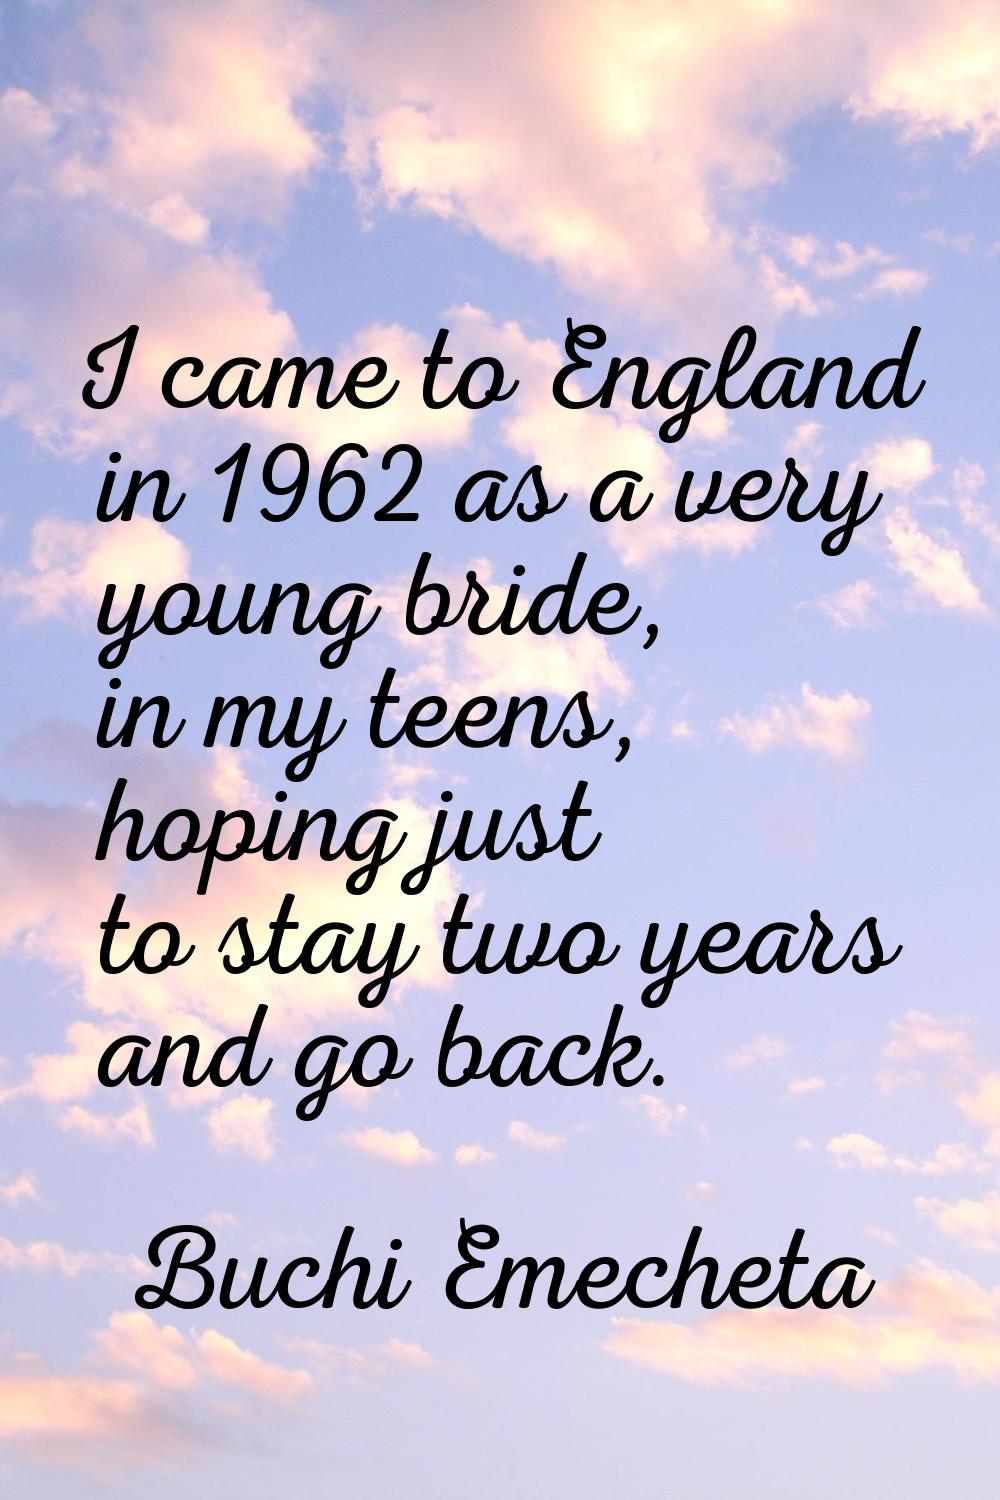 I came to England in 1962 as a very young bride, in my teens, hoping just to stay two years and go 